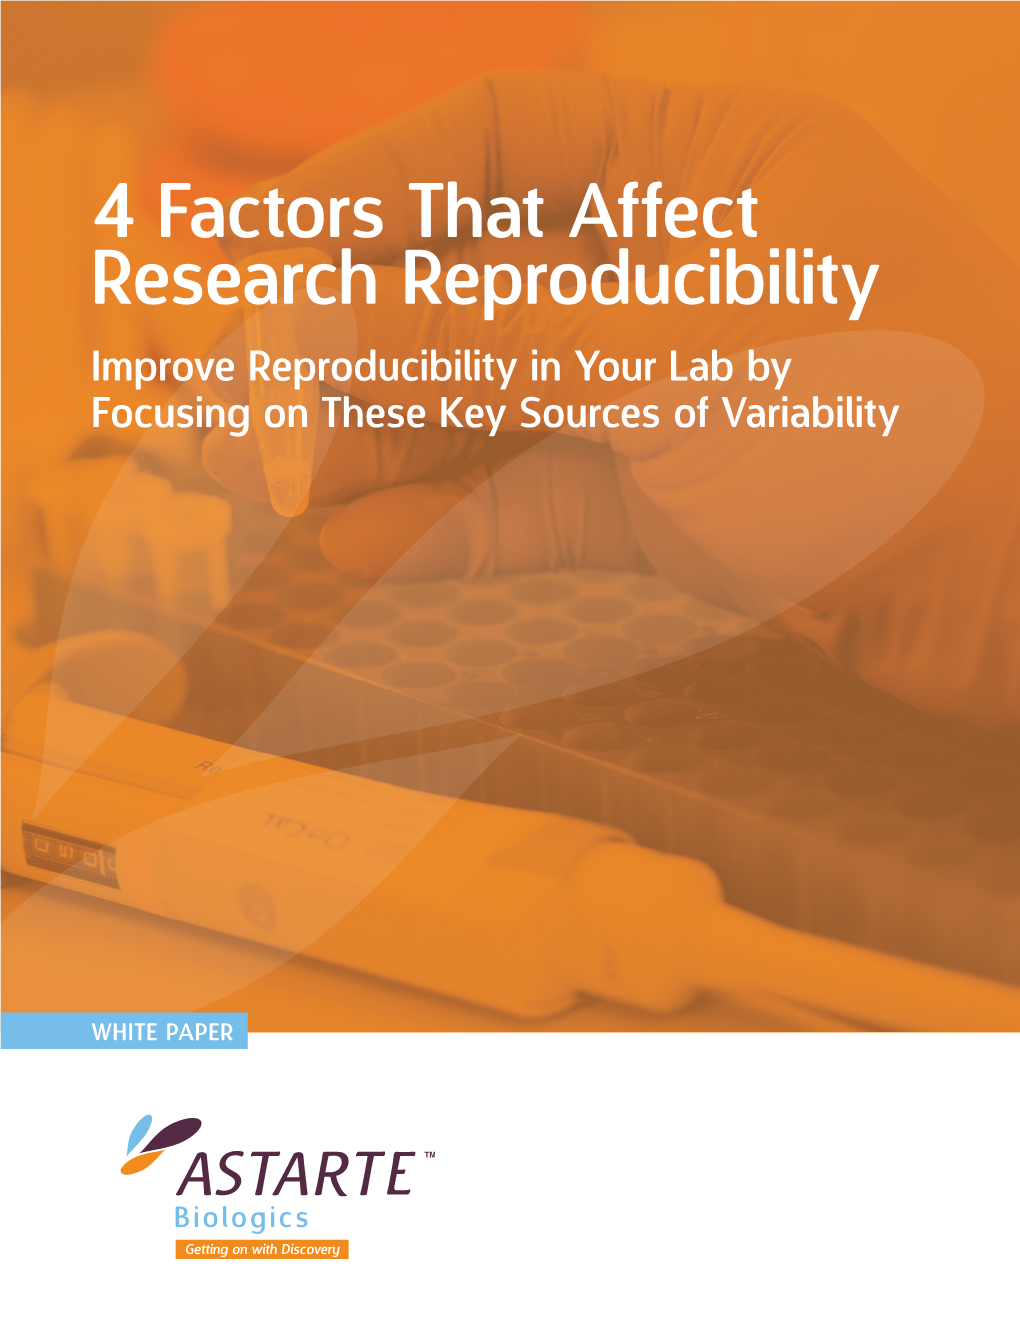 4 Factors That Affect Research Reproducibility Improve Reproducibility in Your Lab by Focusing on These Key Sources of Variability